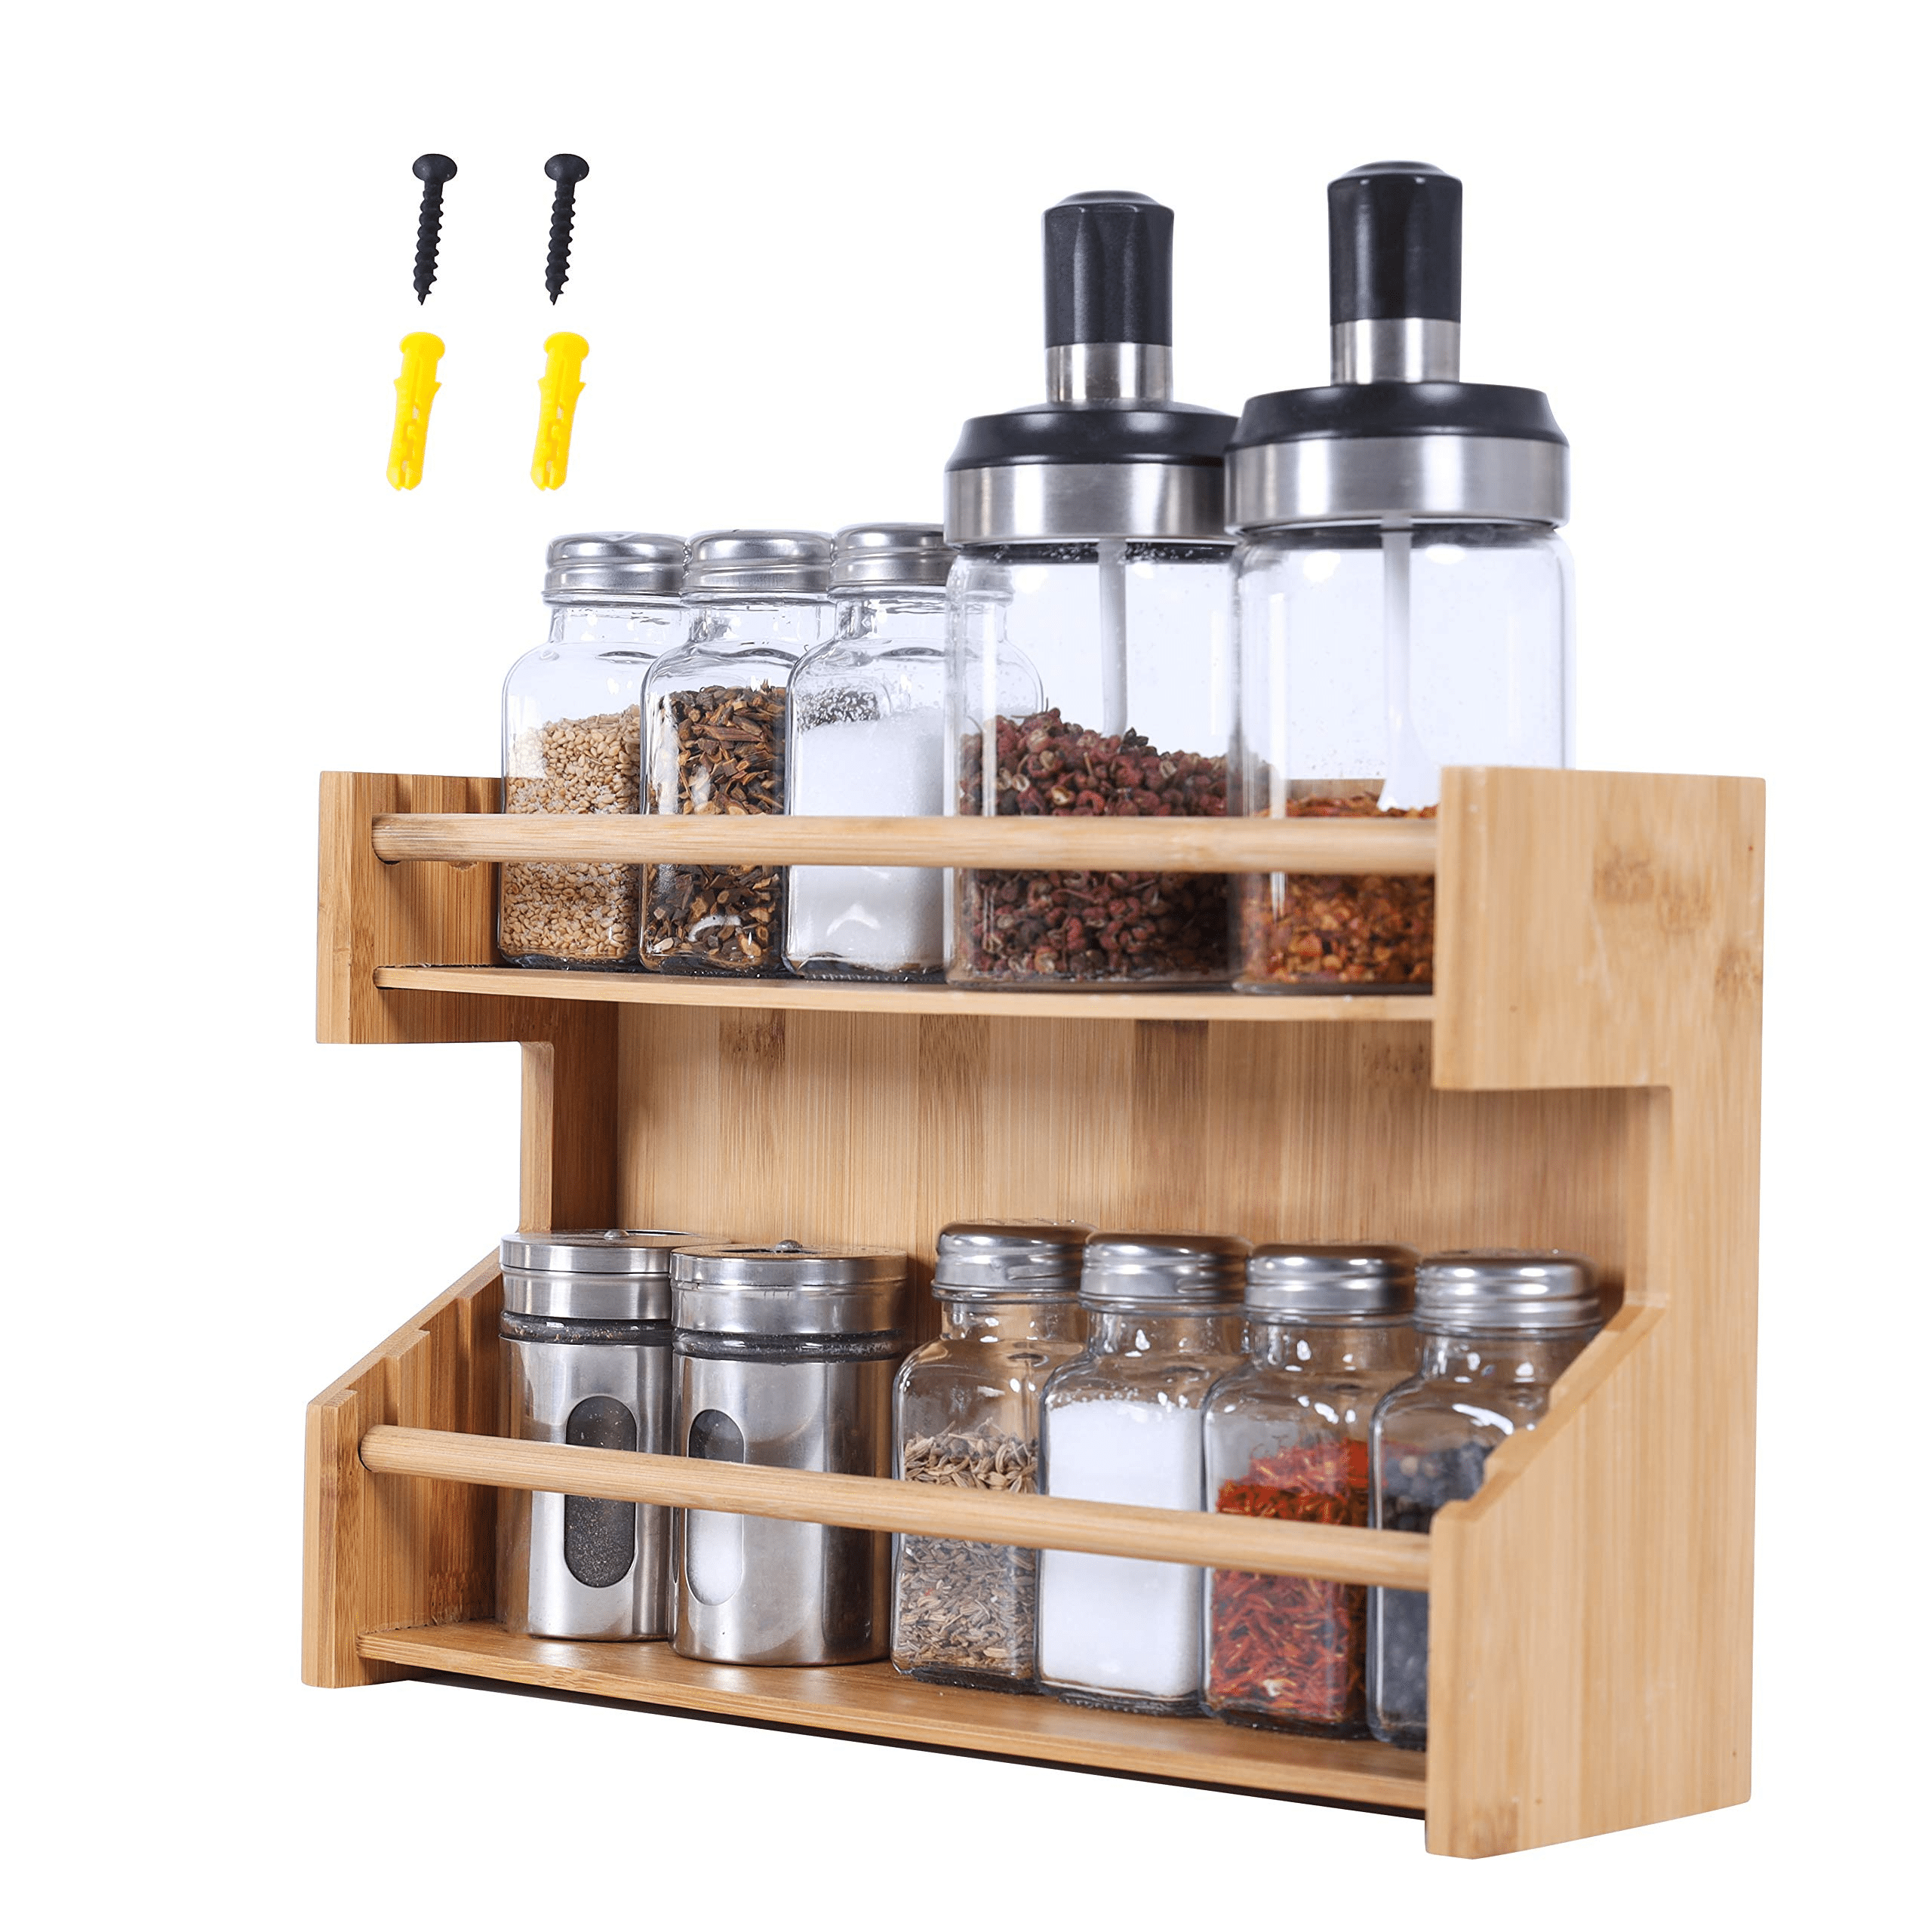  FavorFlavor Spice Rack Organizer for Cabinet & Countertop,  Bamboo Seasoning Organizer for Drawers, Anti-tipping Spice Racks for 24  Seasoning Jars : Home & Kitchen